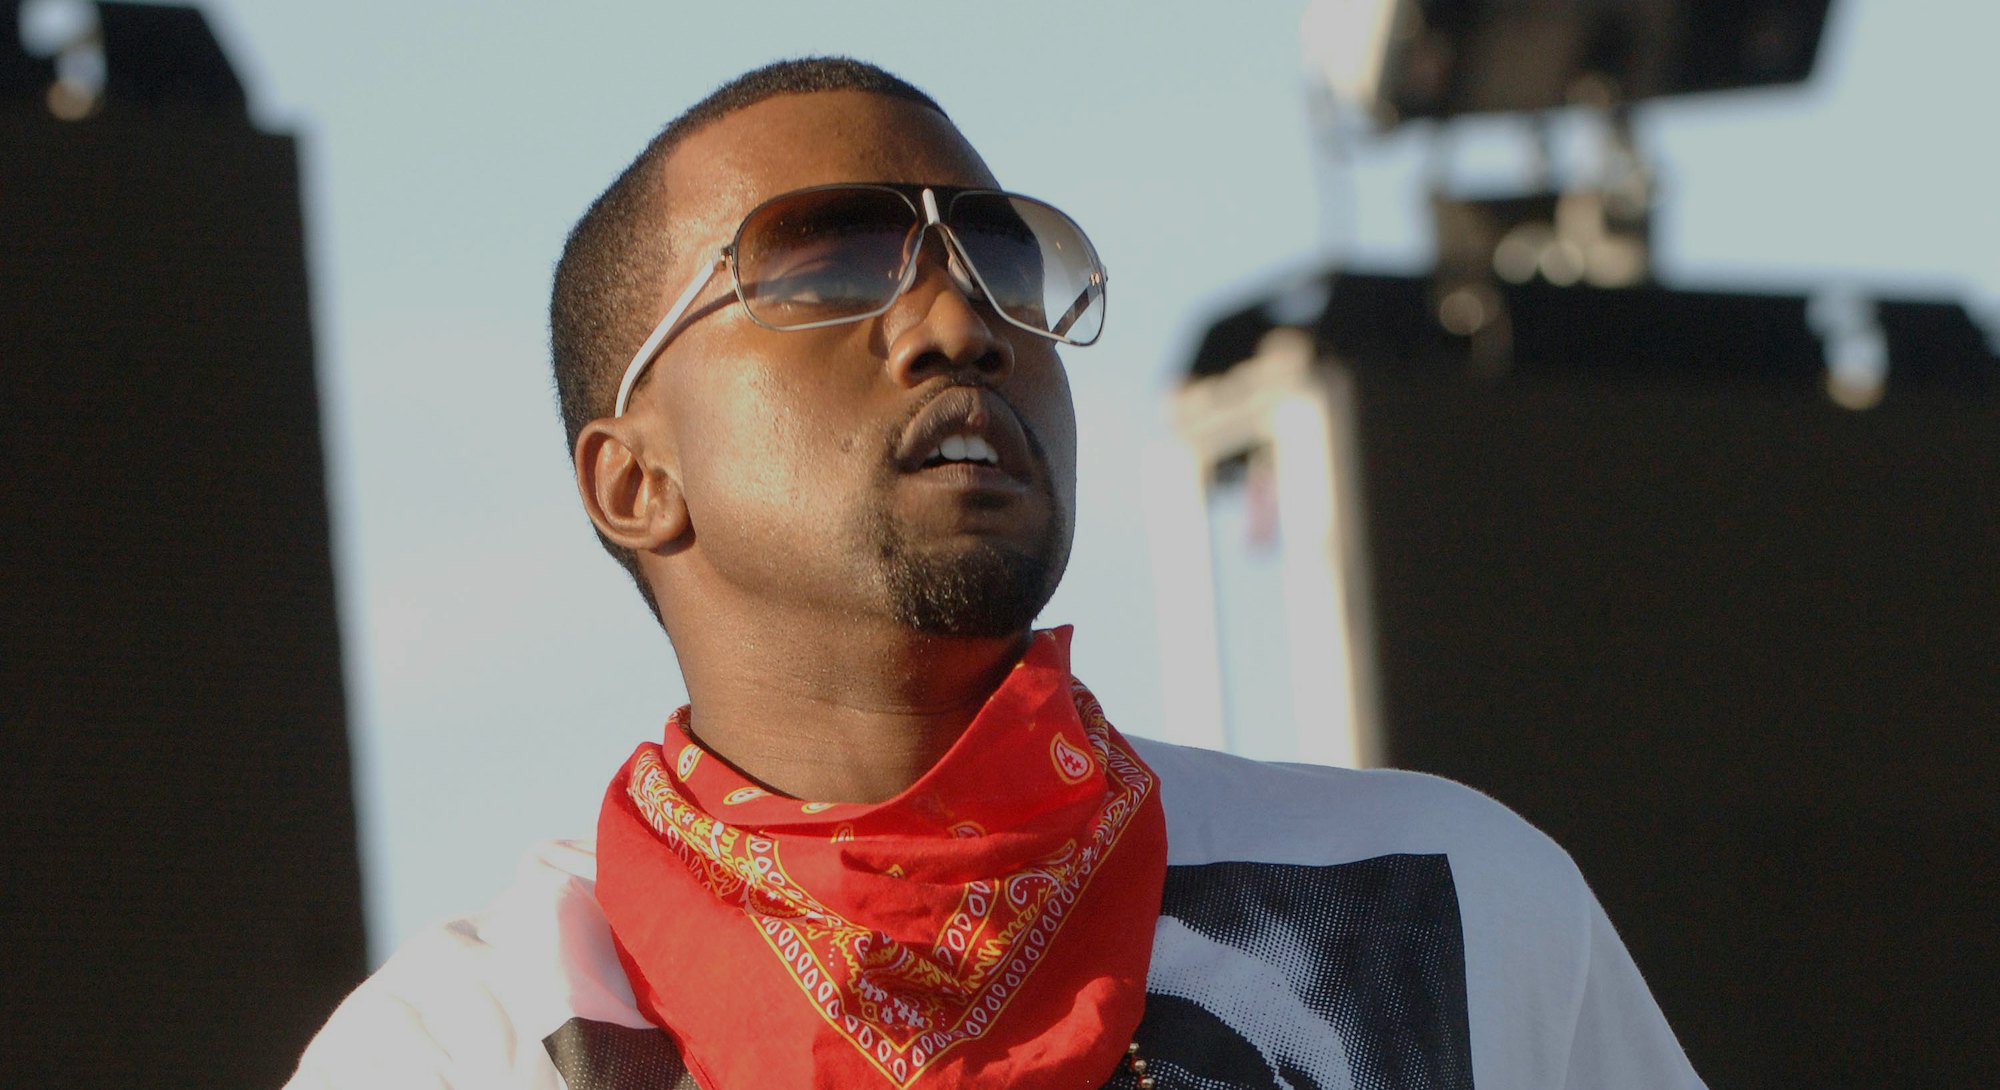 Kanye West performs during Coachella 2006 at the Empire Polo Fields on April 29, 2006 in Indio, Cali...